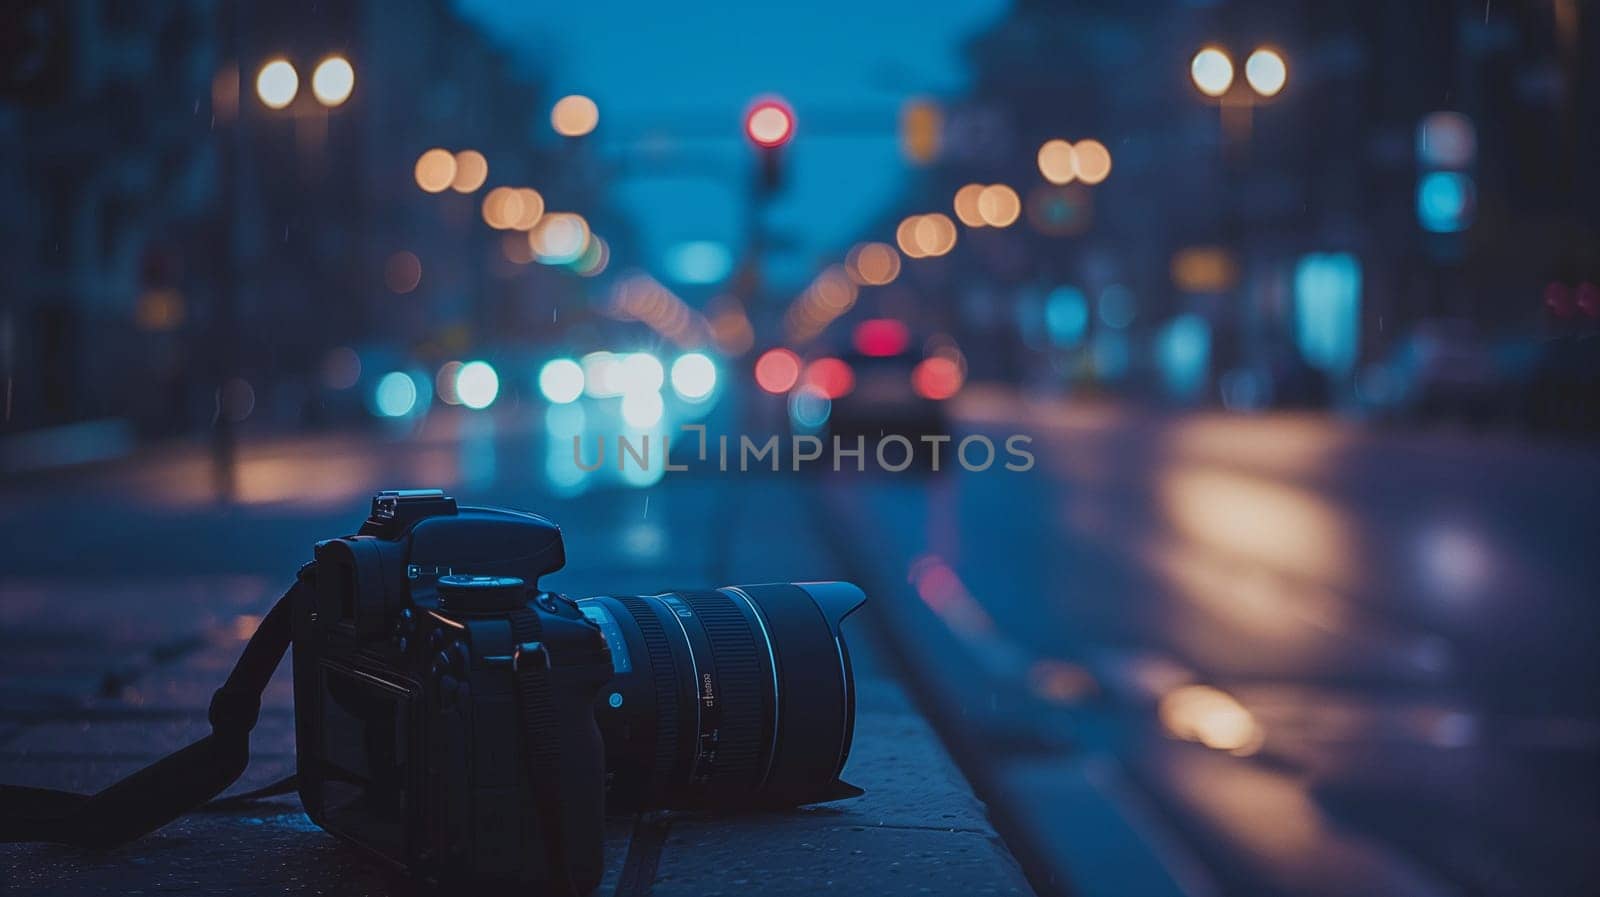 The camera on the evening street. High quality photo